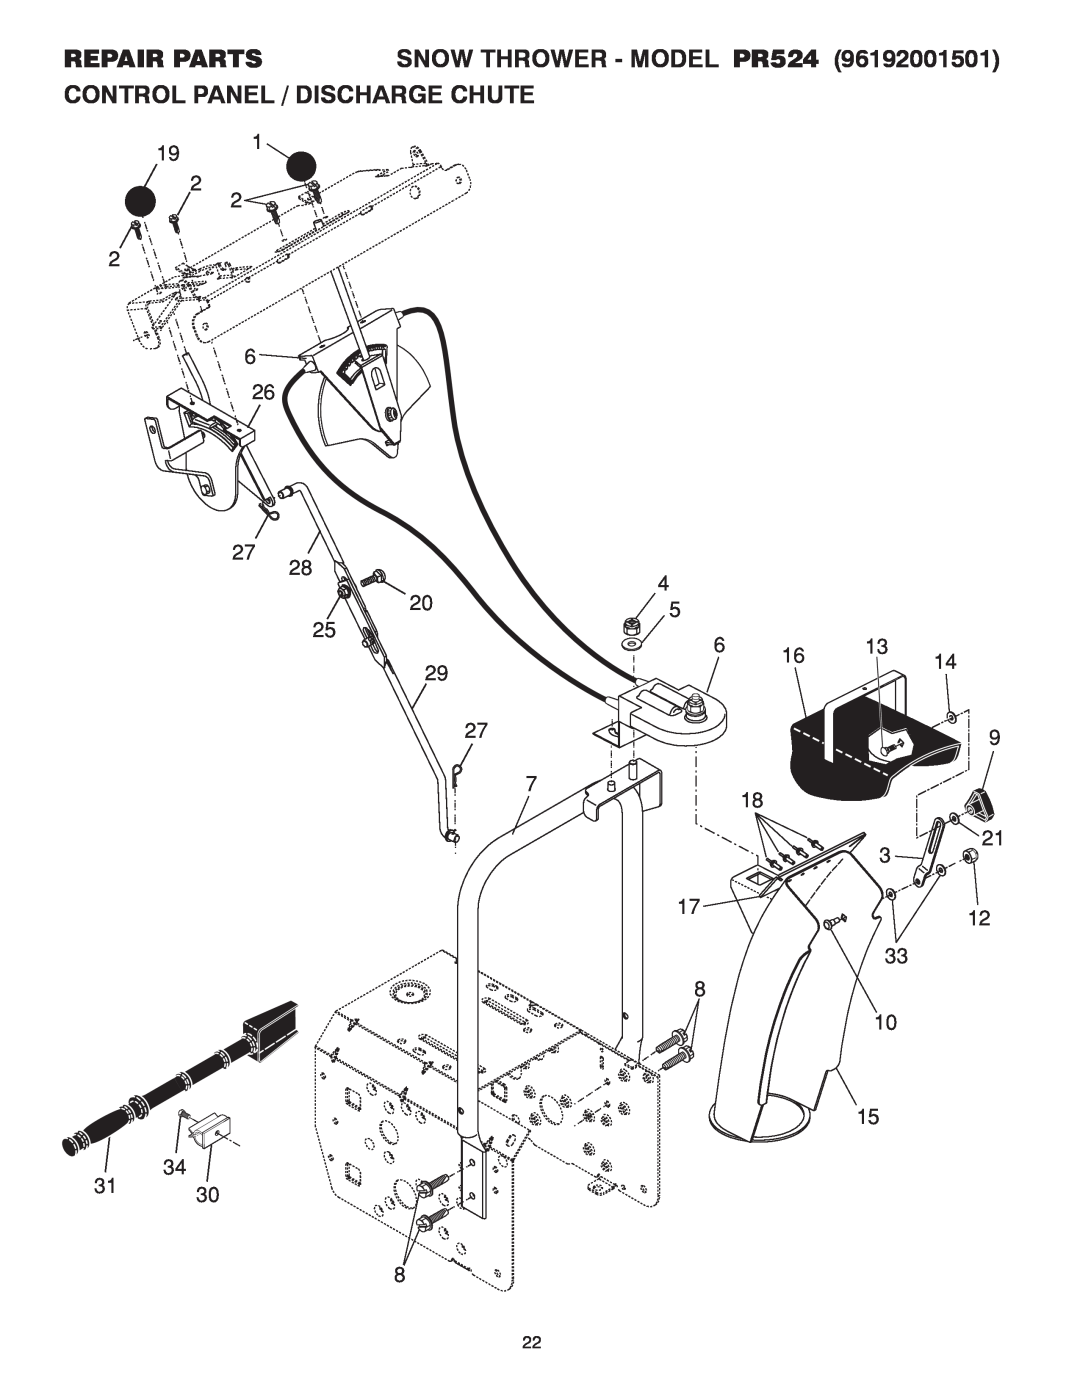 Poulan 415242 owner manual REPAIR PARTS SNOW THROWER - MODEL PR524, Control Panel / Discharge Chute 